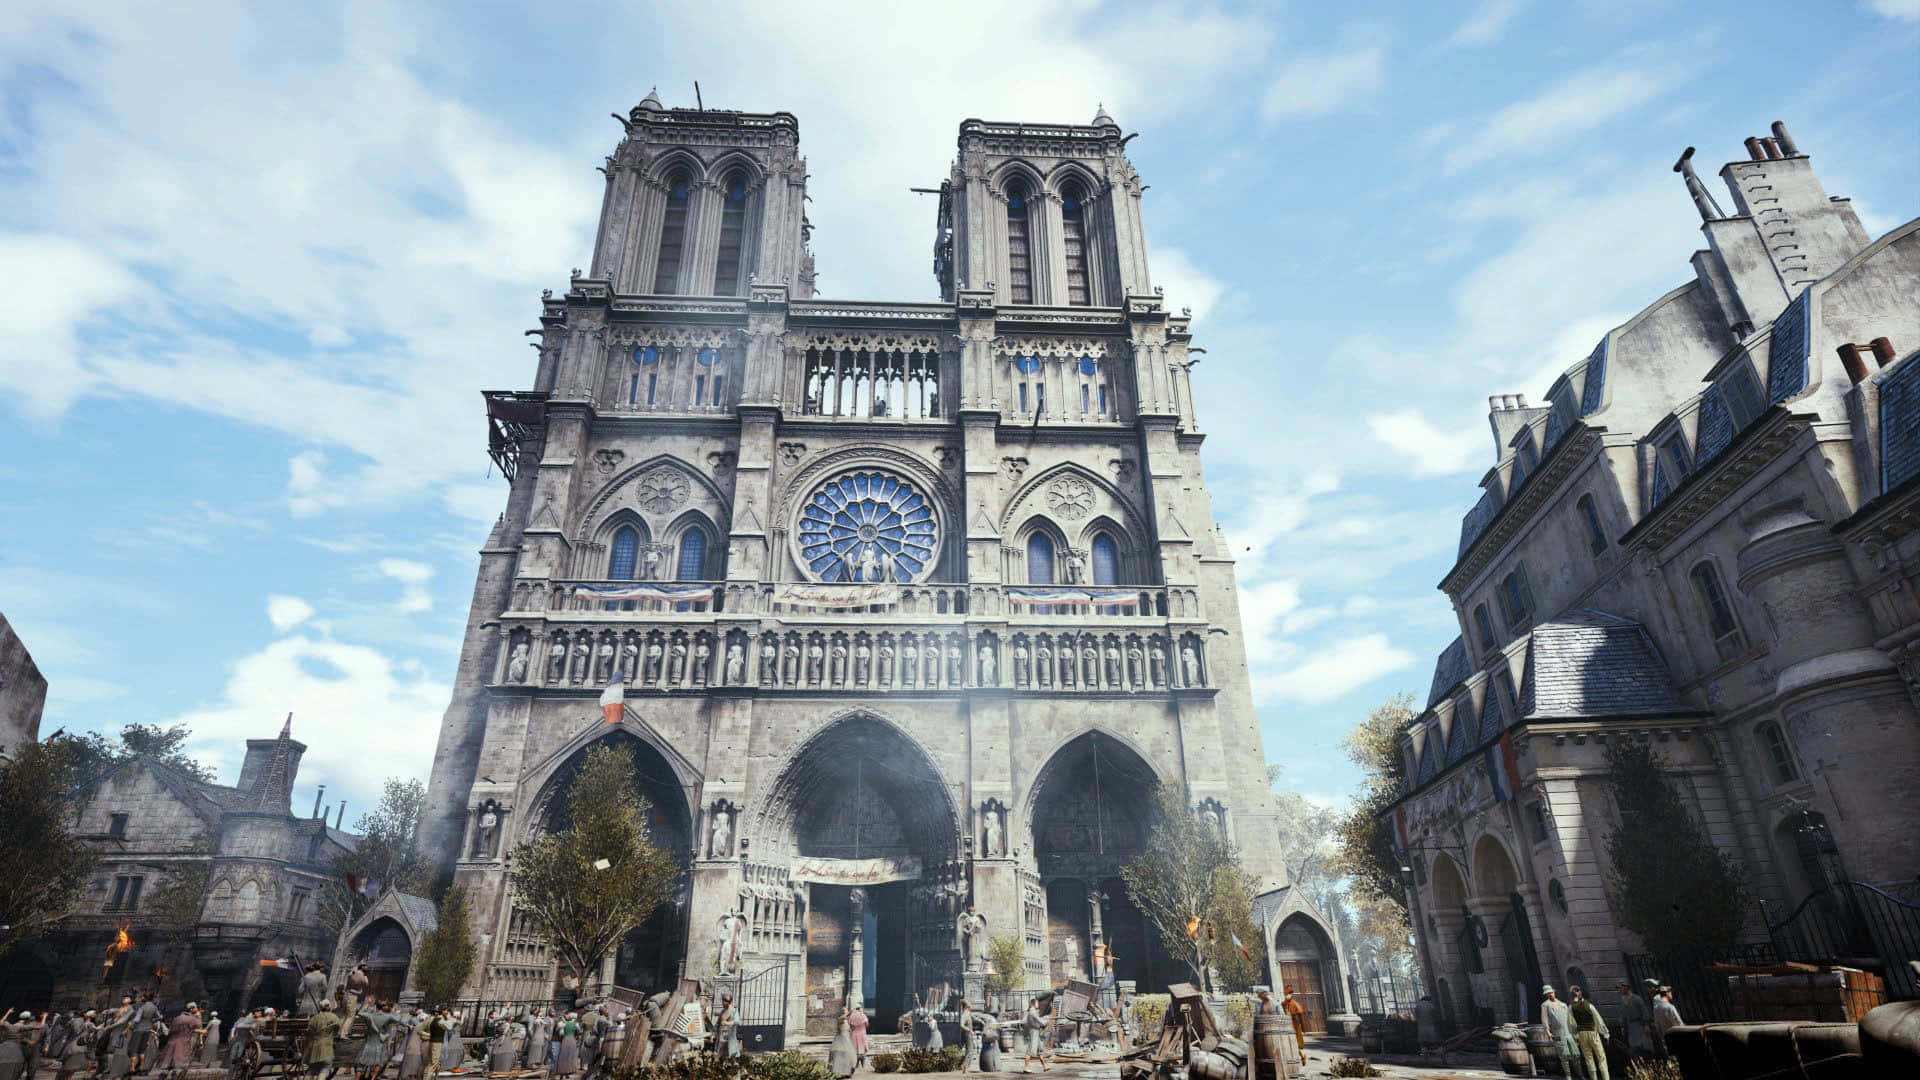 Notredame-kathedrale In Assassin's Creed Wallpaper